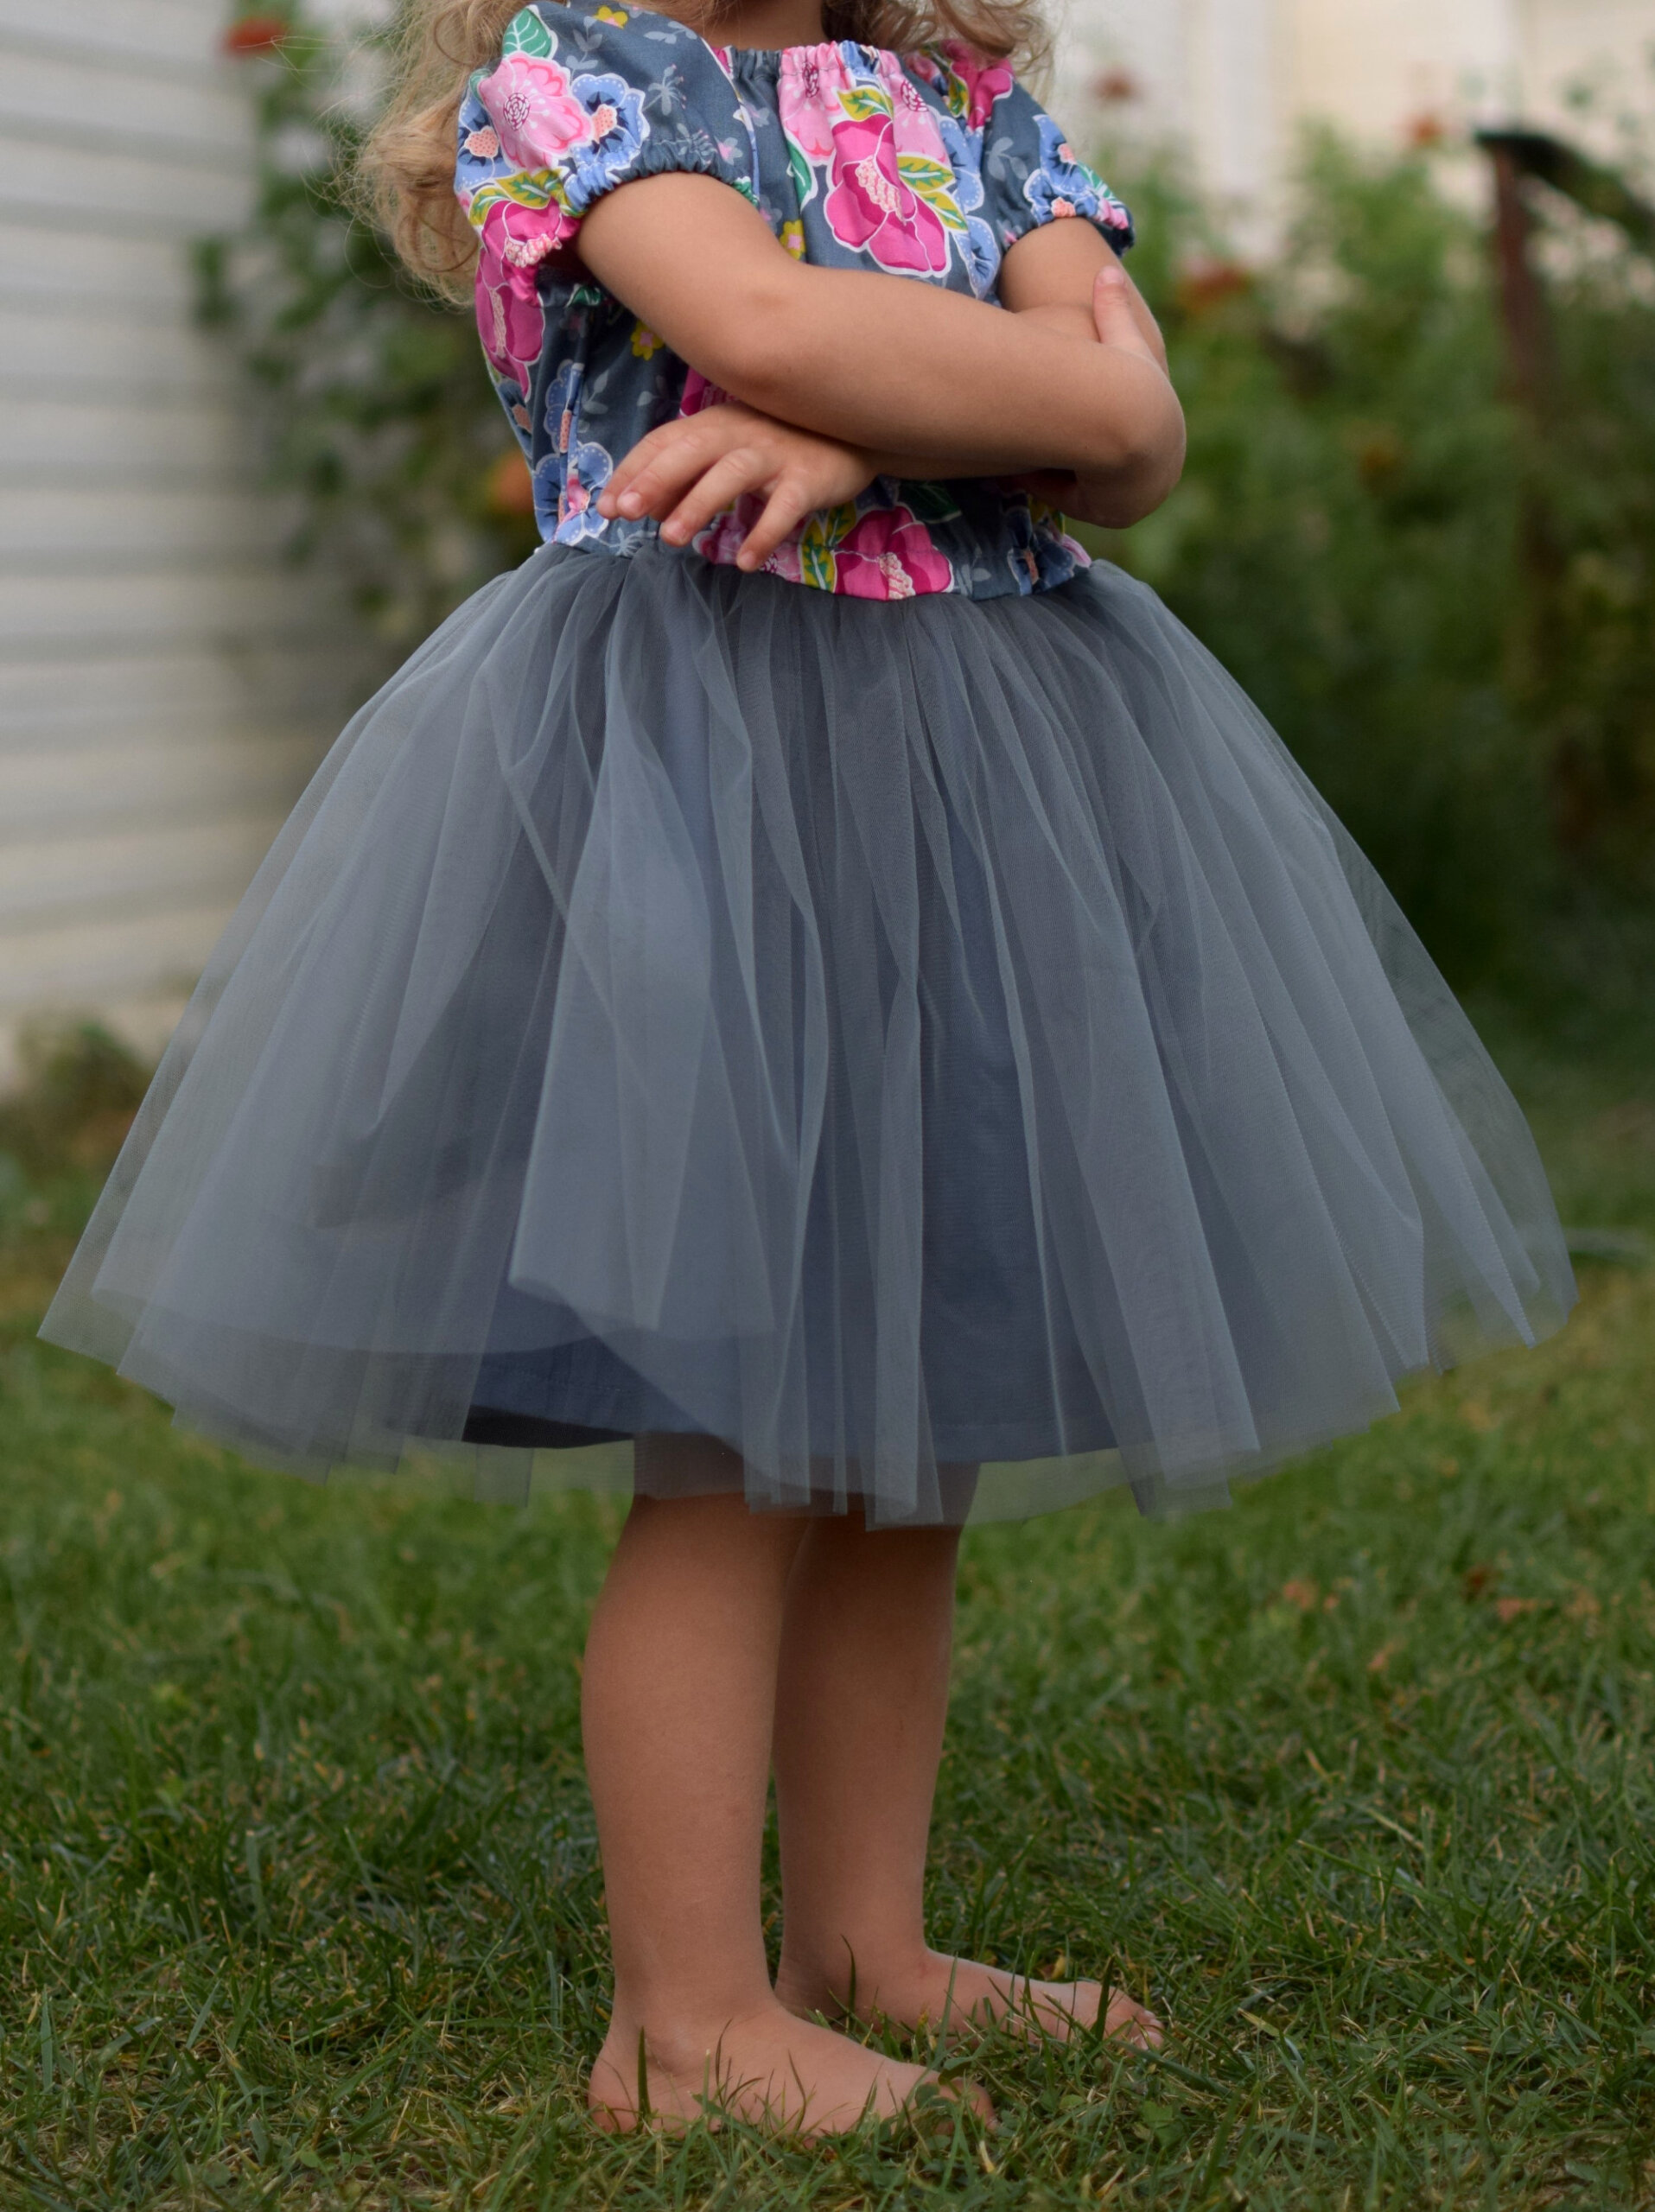 DIY/COUDRE UNE JUPE PRINCESSE, TULLE POUR PETITE FILLE / HOW TO SEW  PRINCESS SKIRT FOR BABY GIRL 